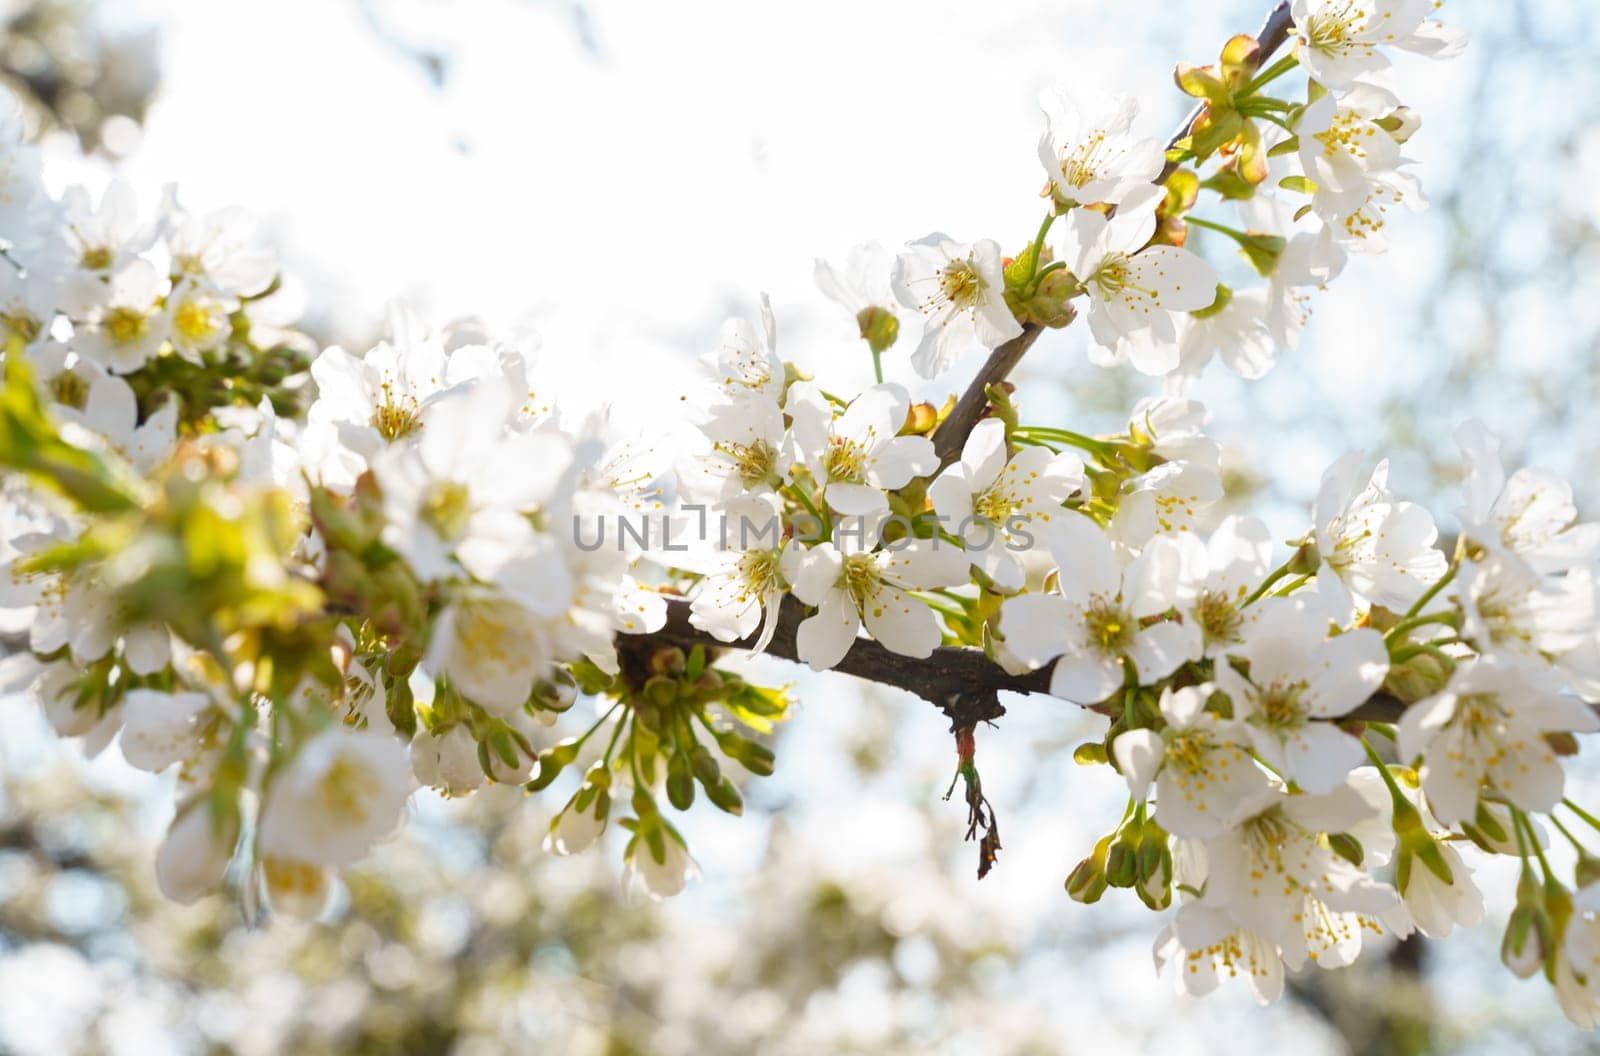 Cherry flowers, white in clusters on a branch of a cherry tree. Shallow depth of field.